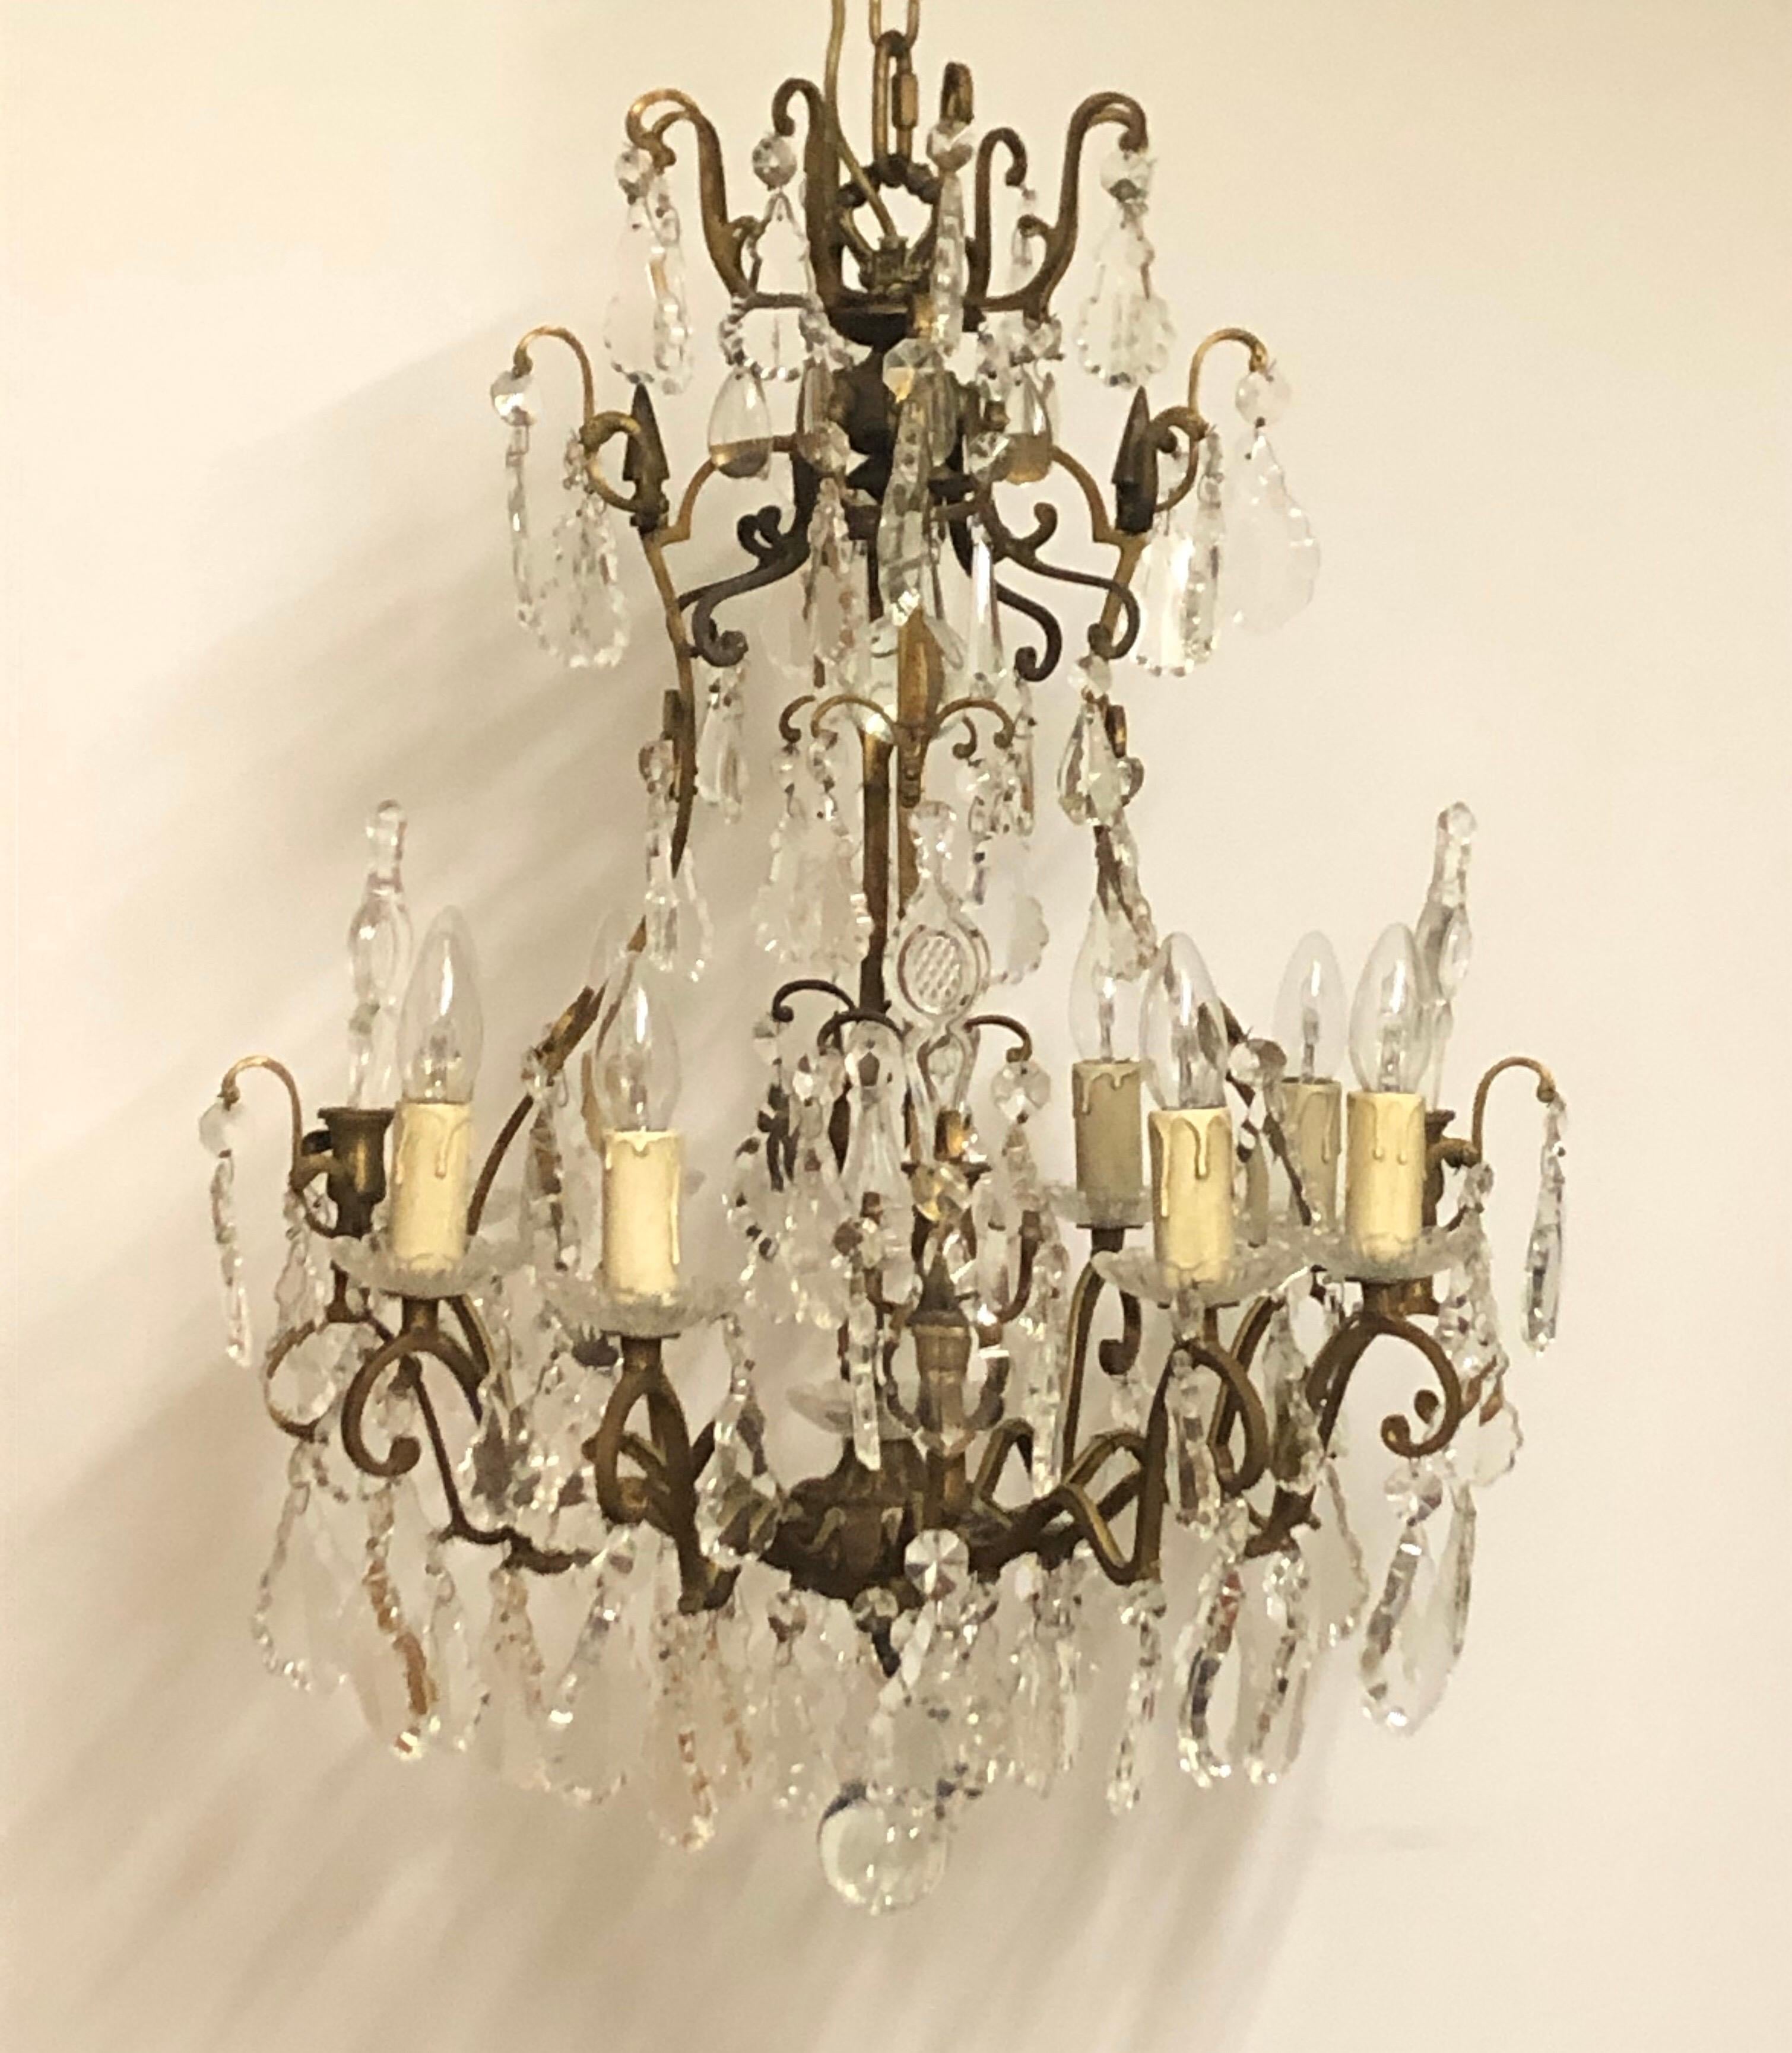 Beautiful eight-light massive bronze and crystal glass chandelier, France, circa 1970s.
Pair available.
The height incl. chain is 55.11